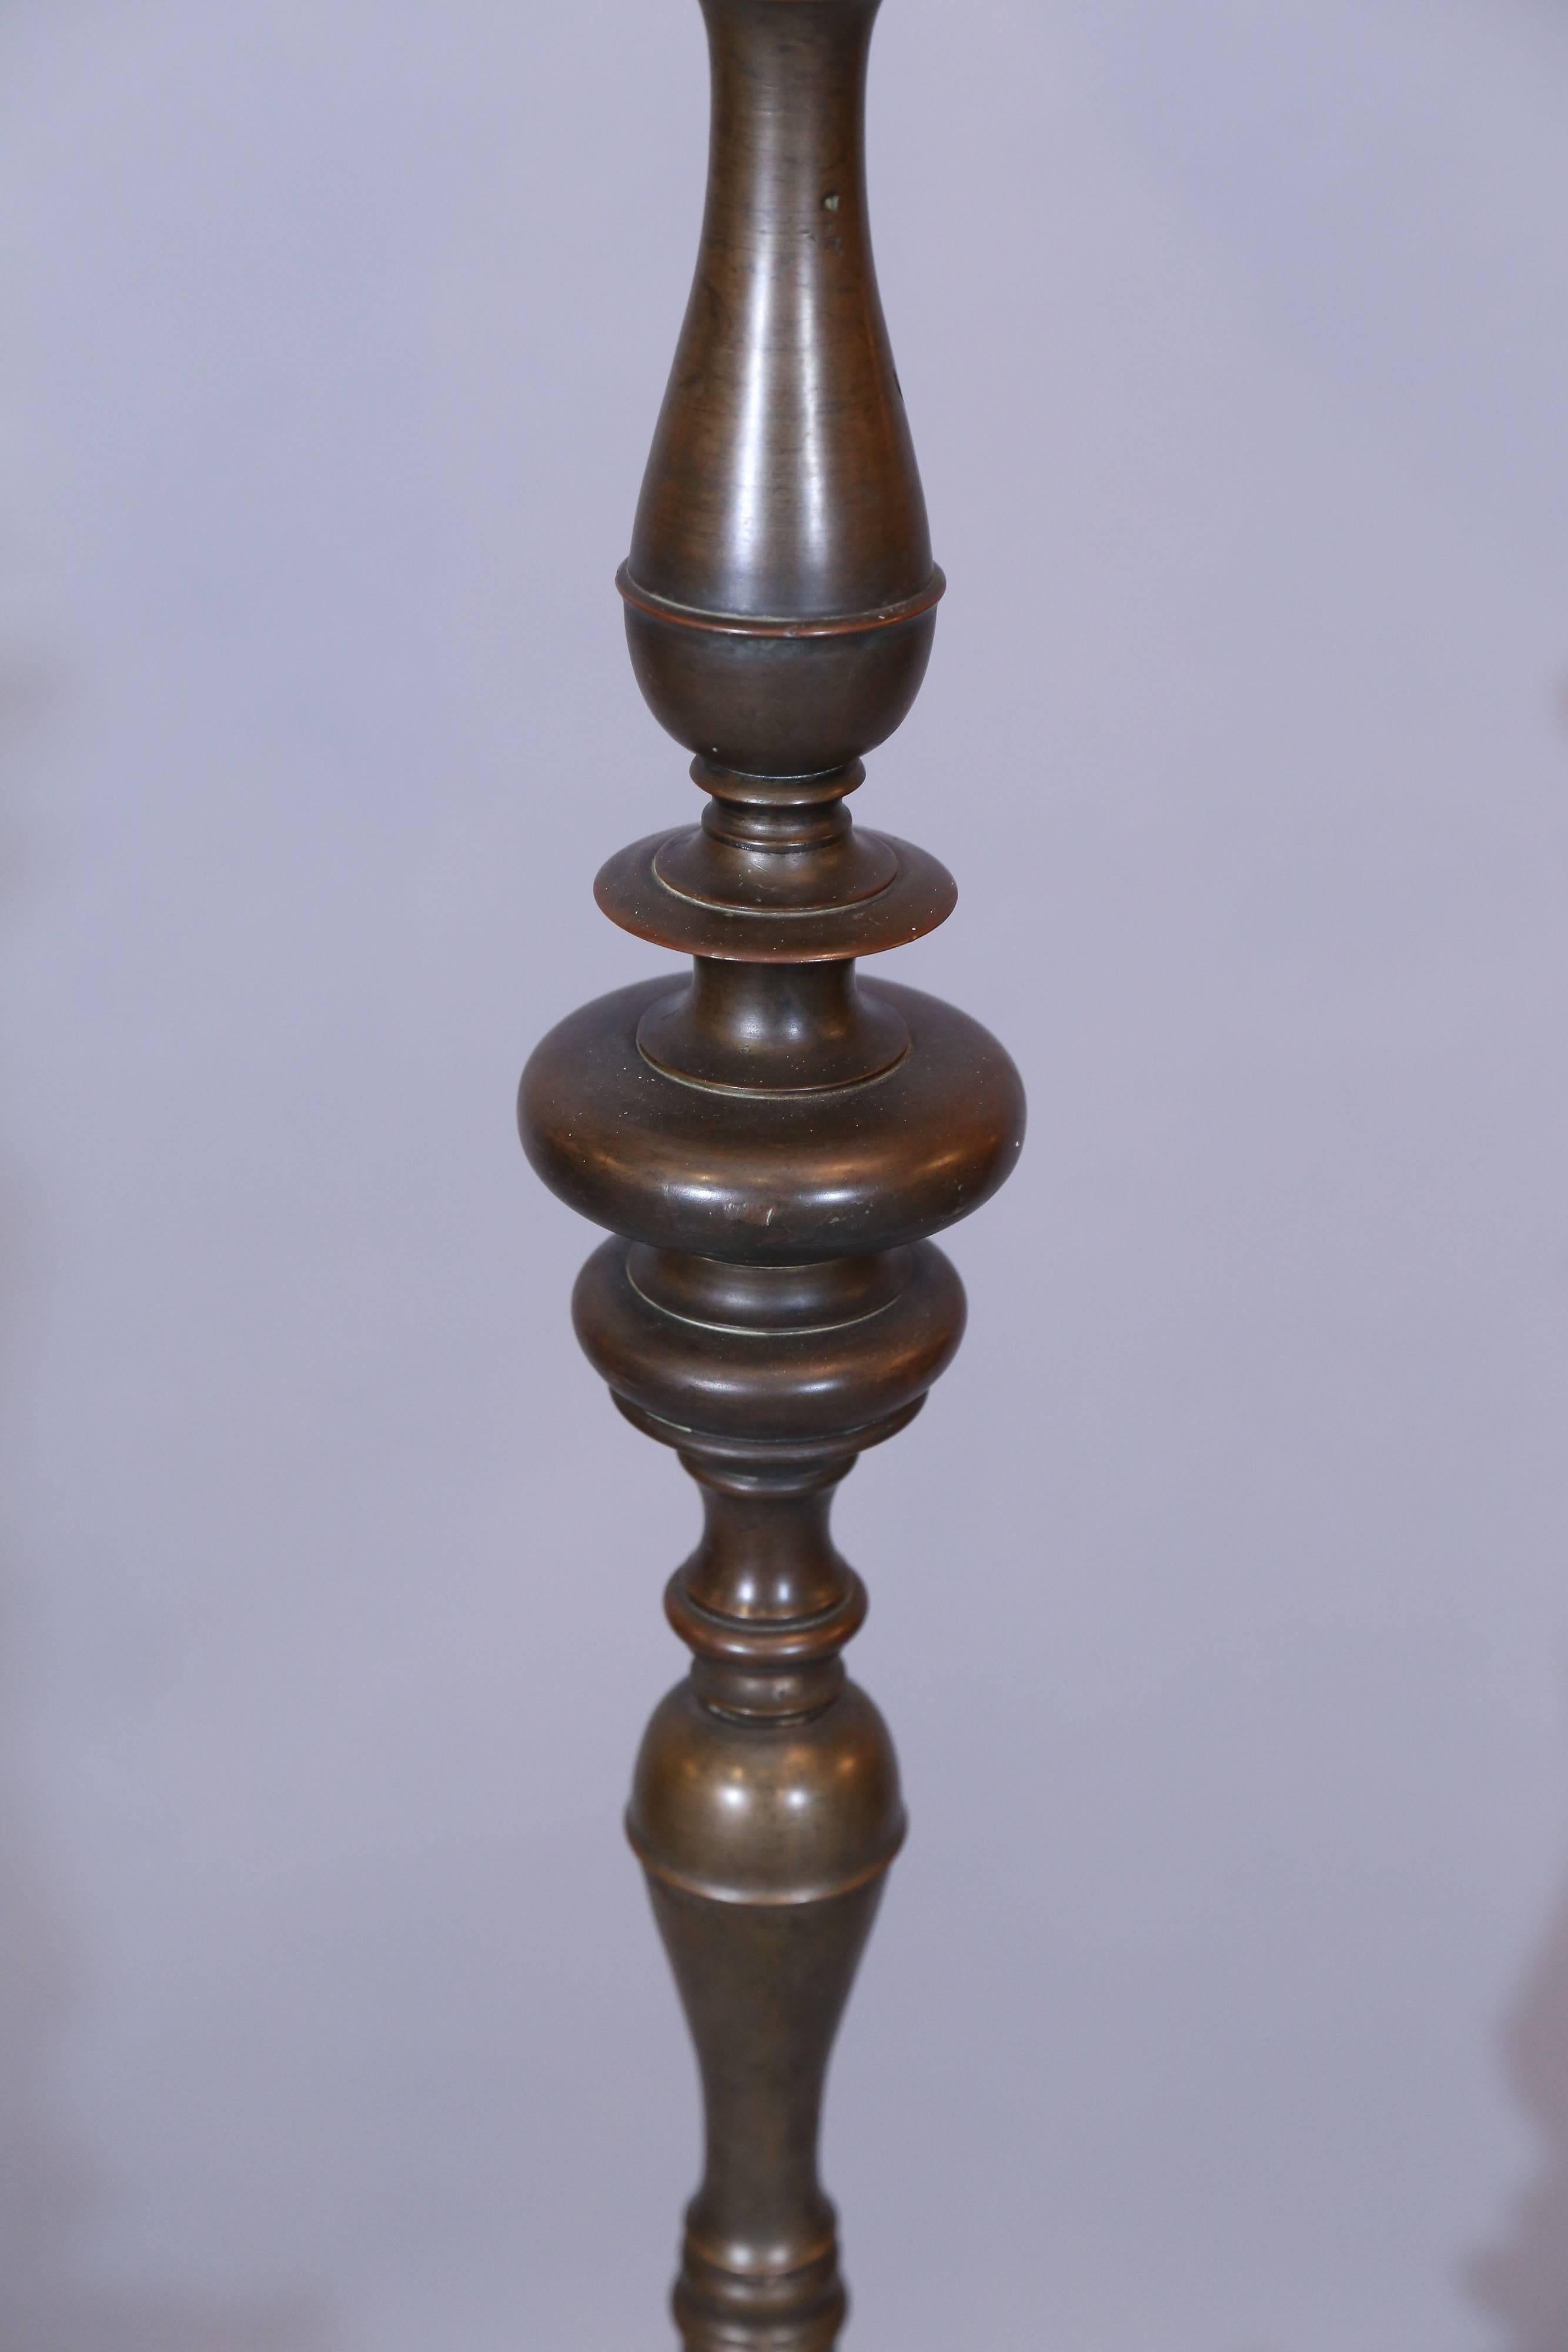 Baroque candlestick made of very heavy gauge bronze and sits upon an acanthus leaf wrought Iron tripod stand.

Candlestick has been converted to a lamp.